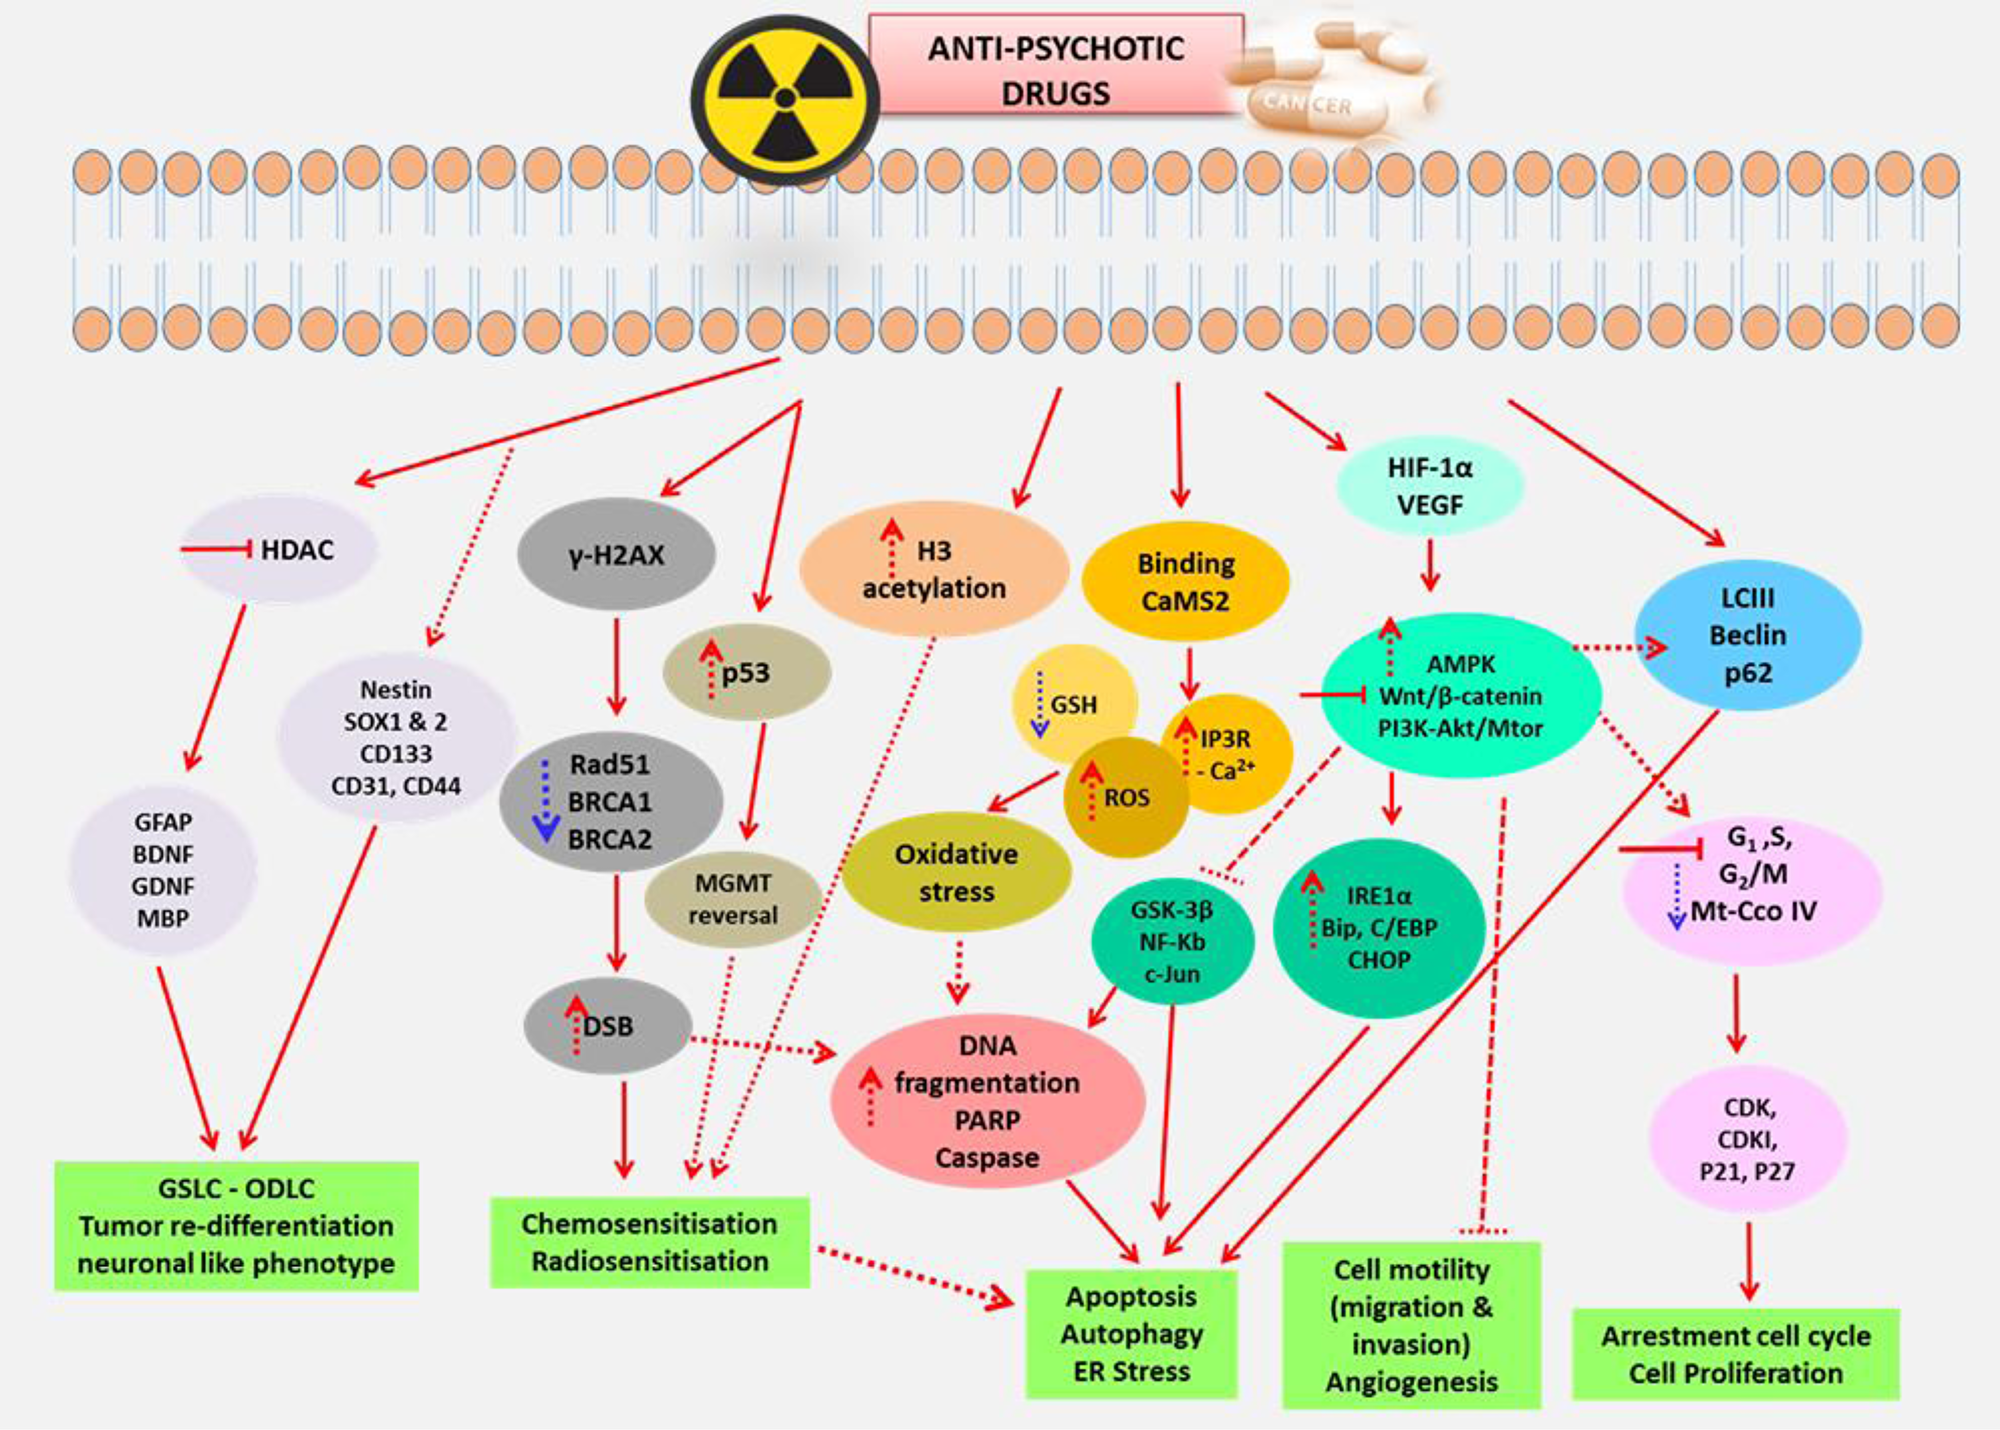 The summarized mechanistic pathways and molecular targets of anti-psychotic drugs.